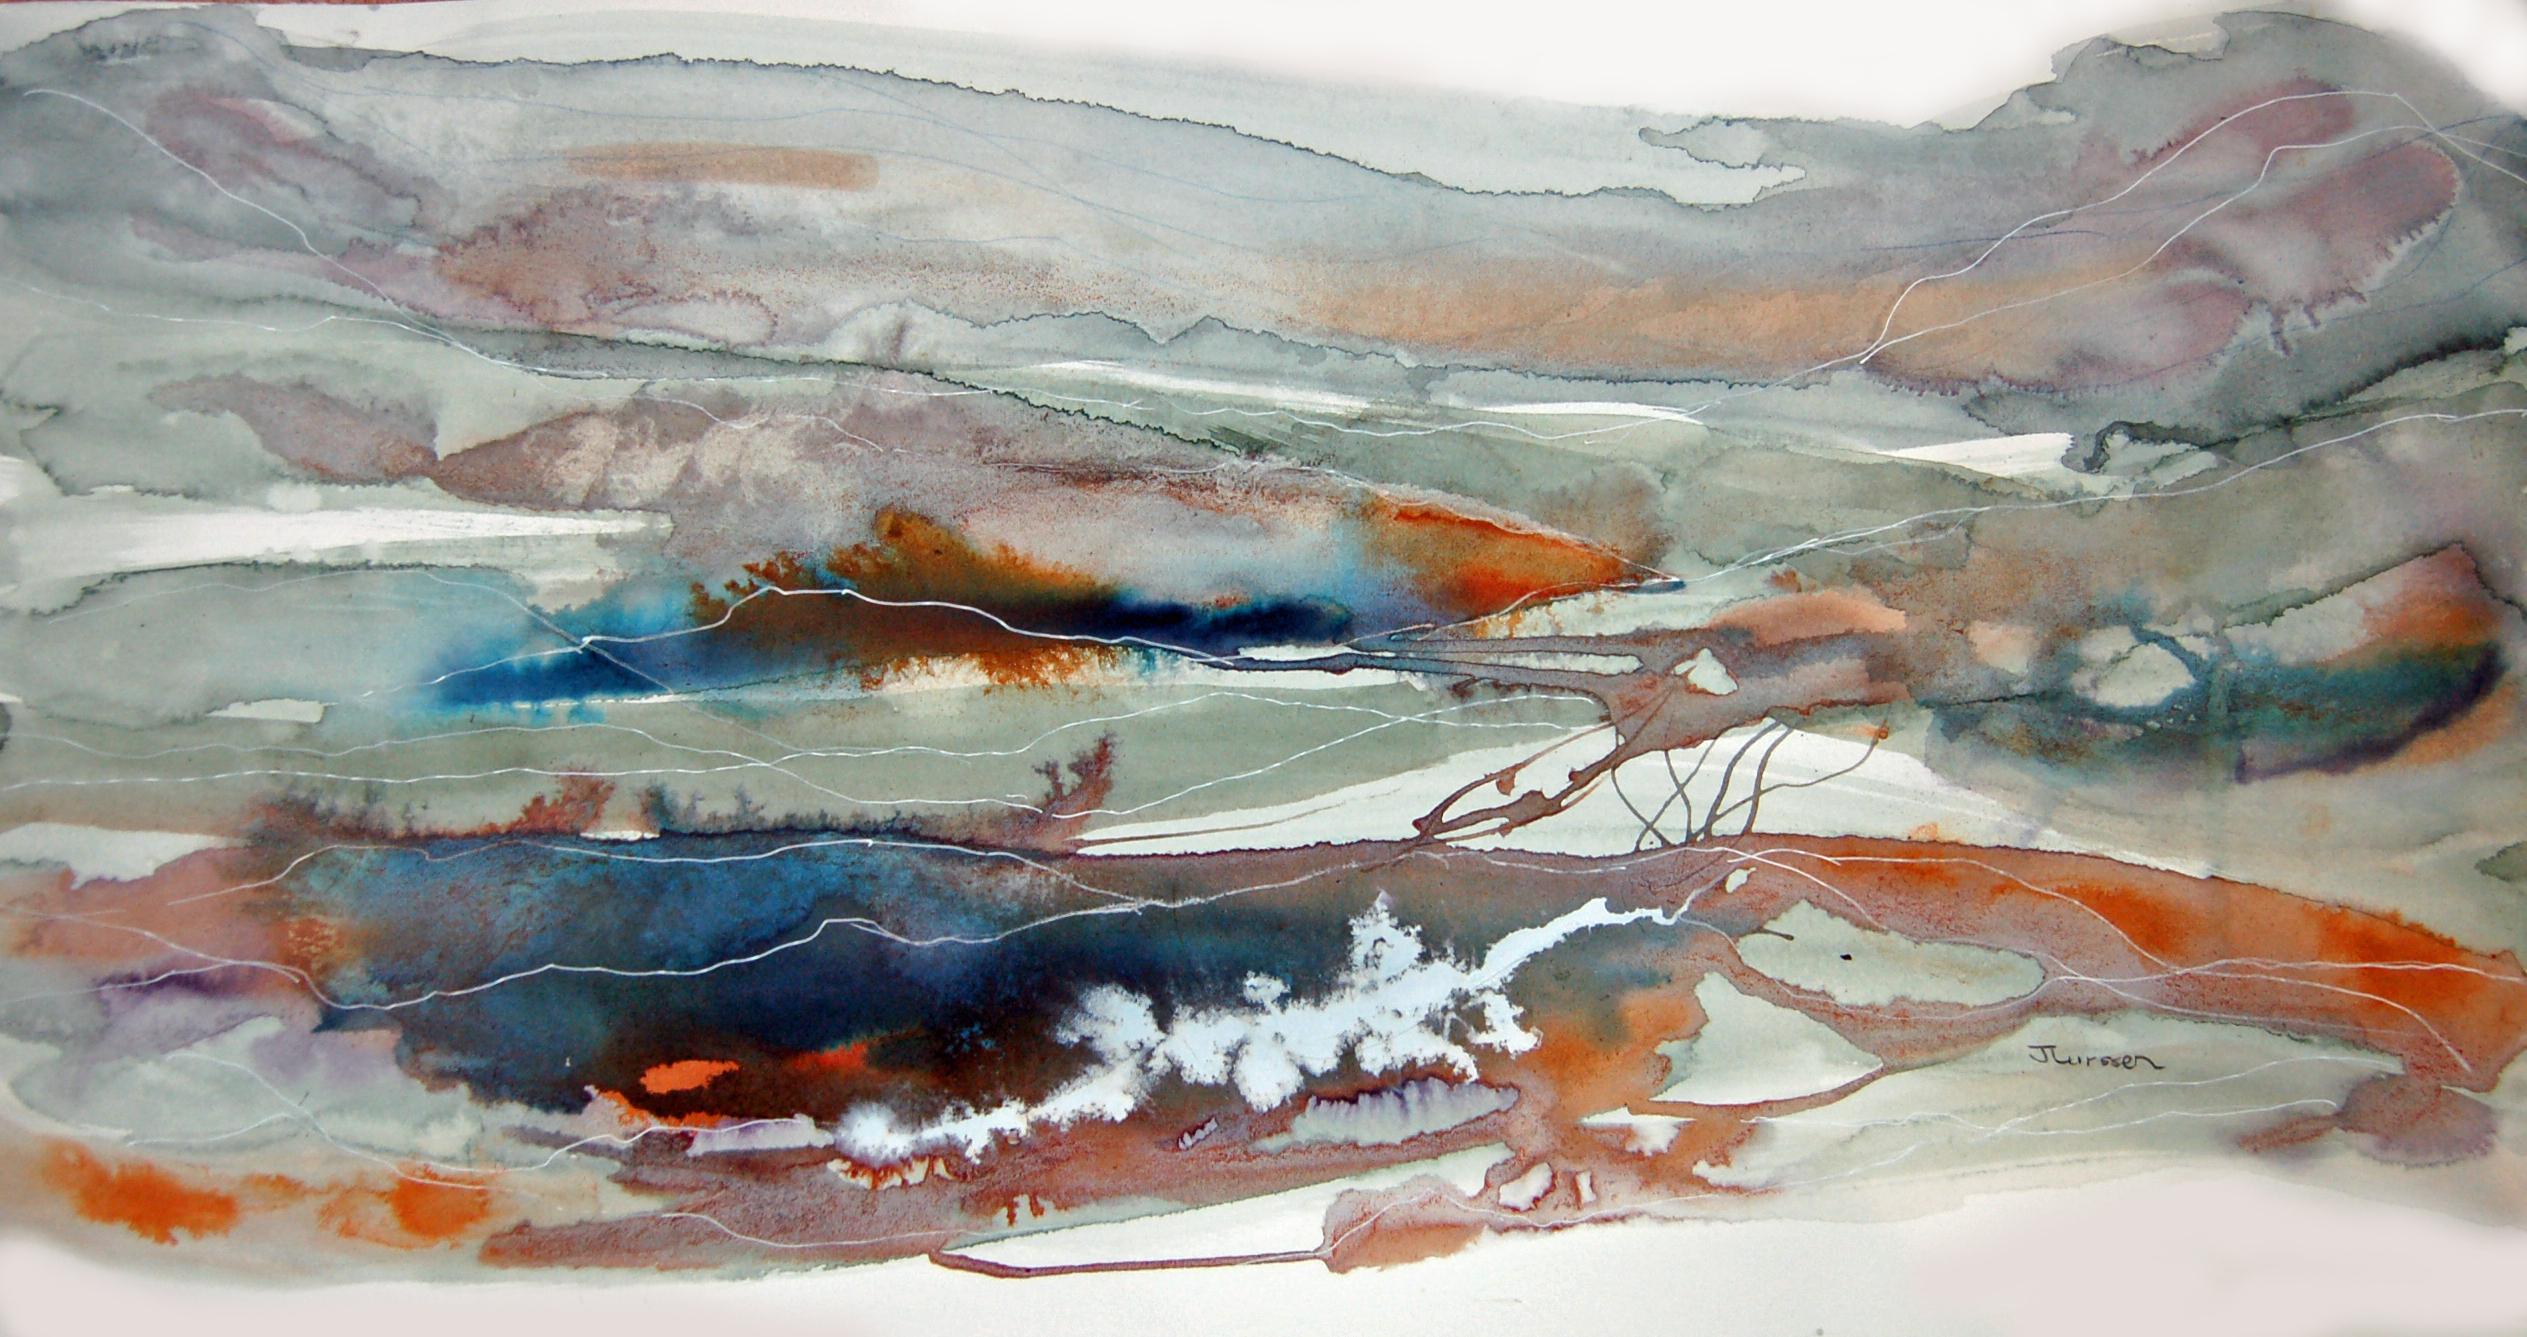 Mountain Ranges, Mixed Media on Watercolor Paper - Mixed Media Art by Jean Lurssen